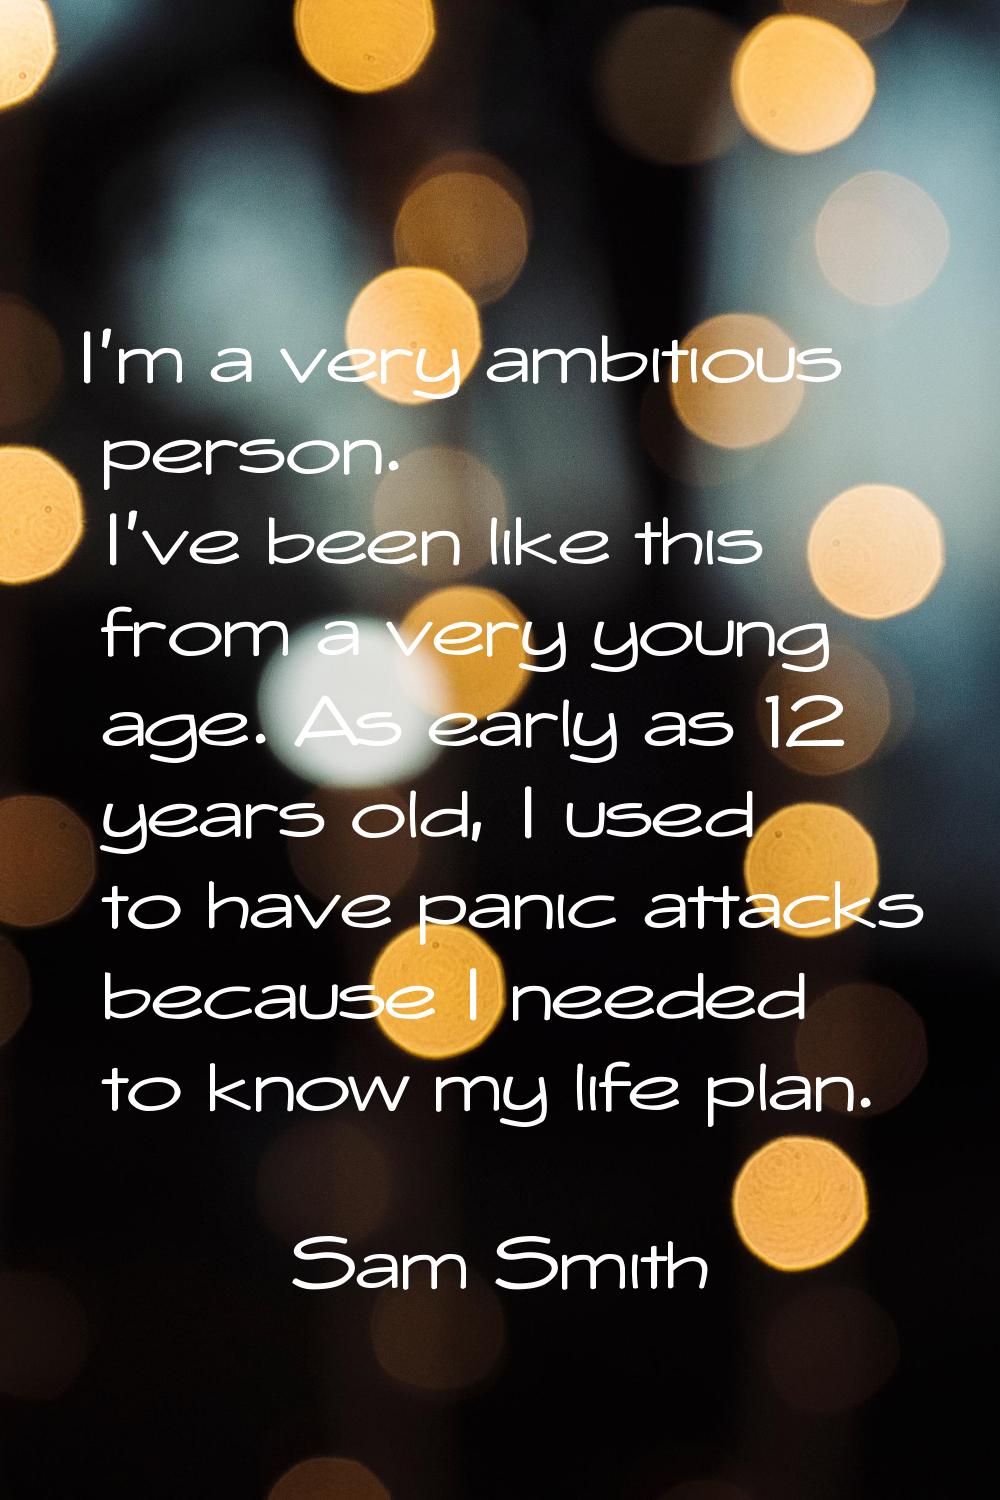 I'm a very ambitious person. I've been like this from a very young age. As early as 12 years old, I